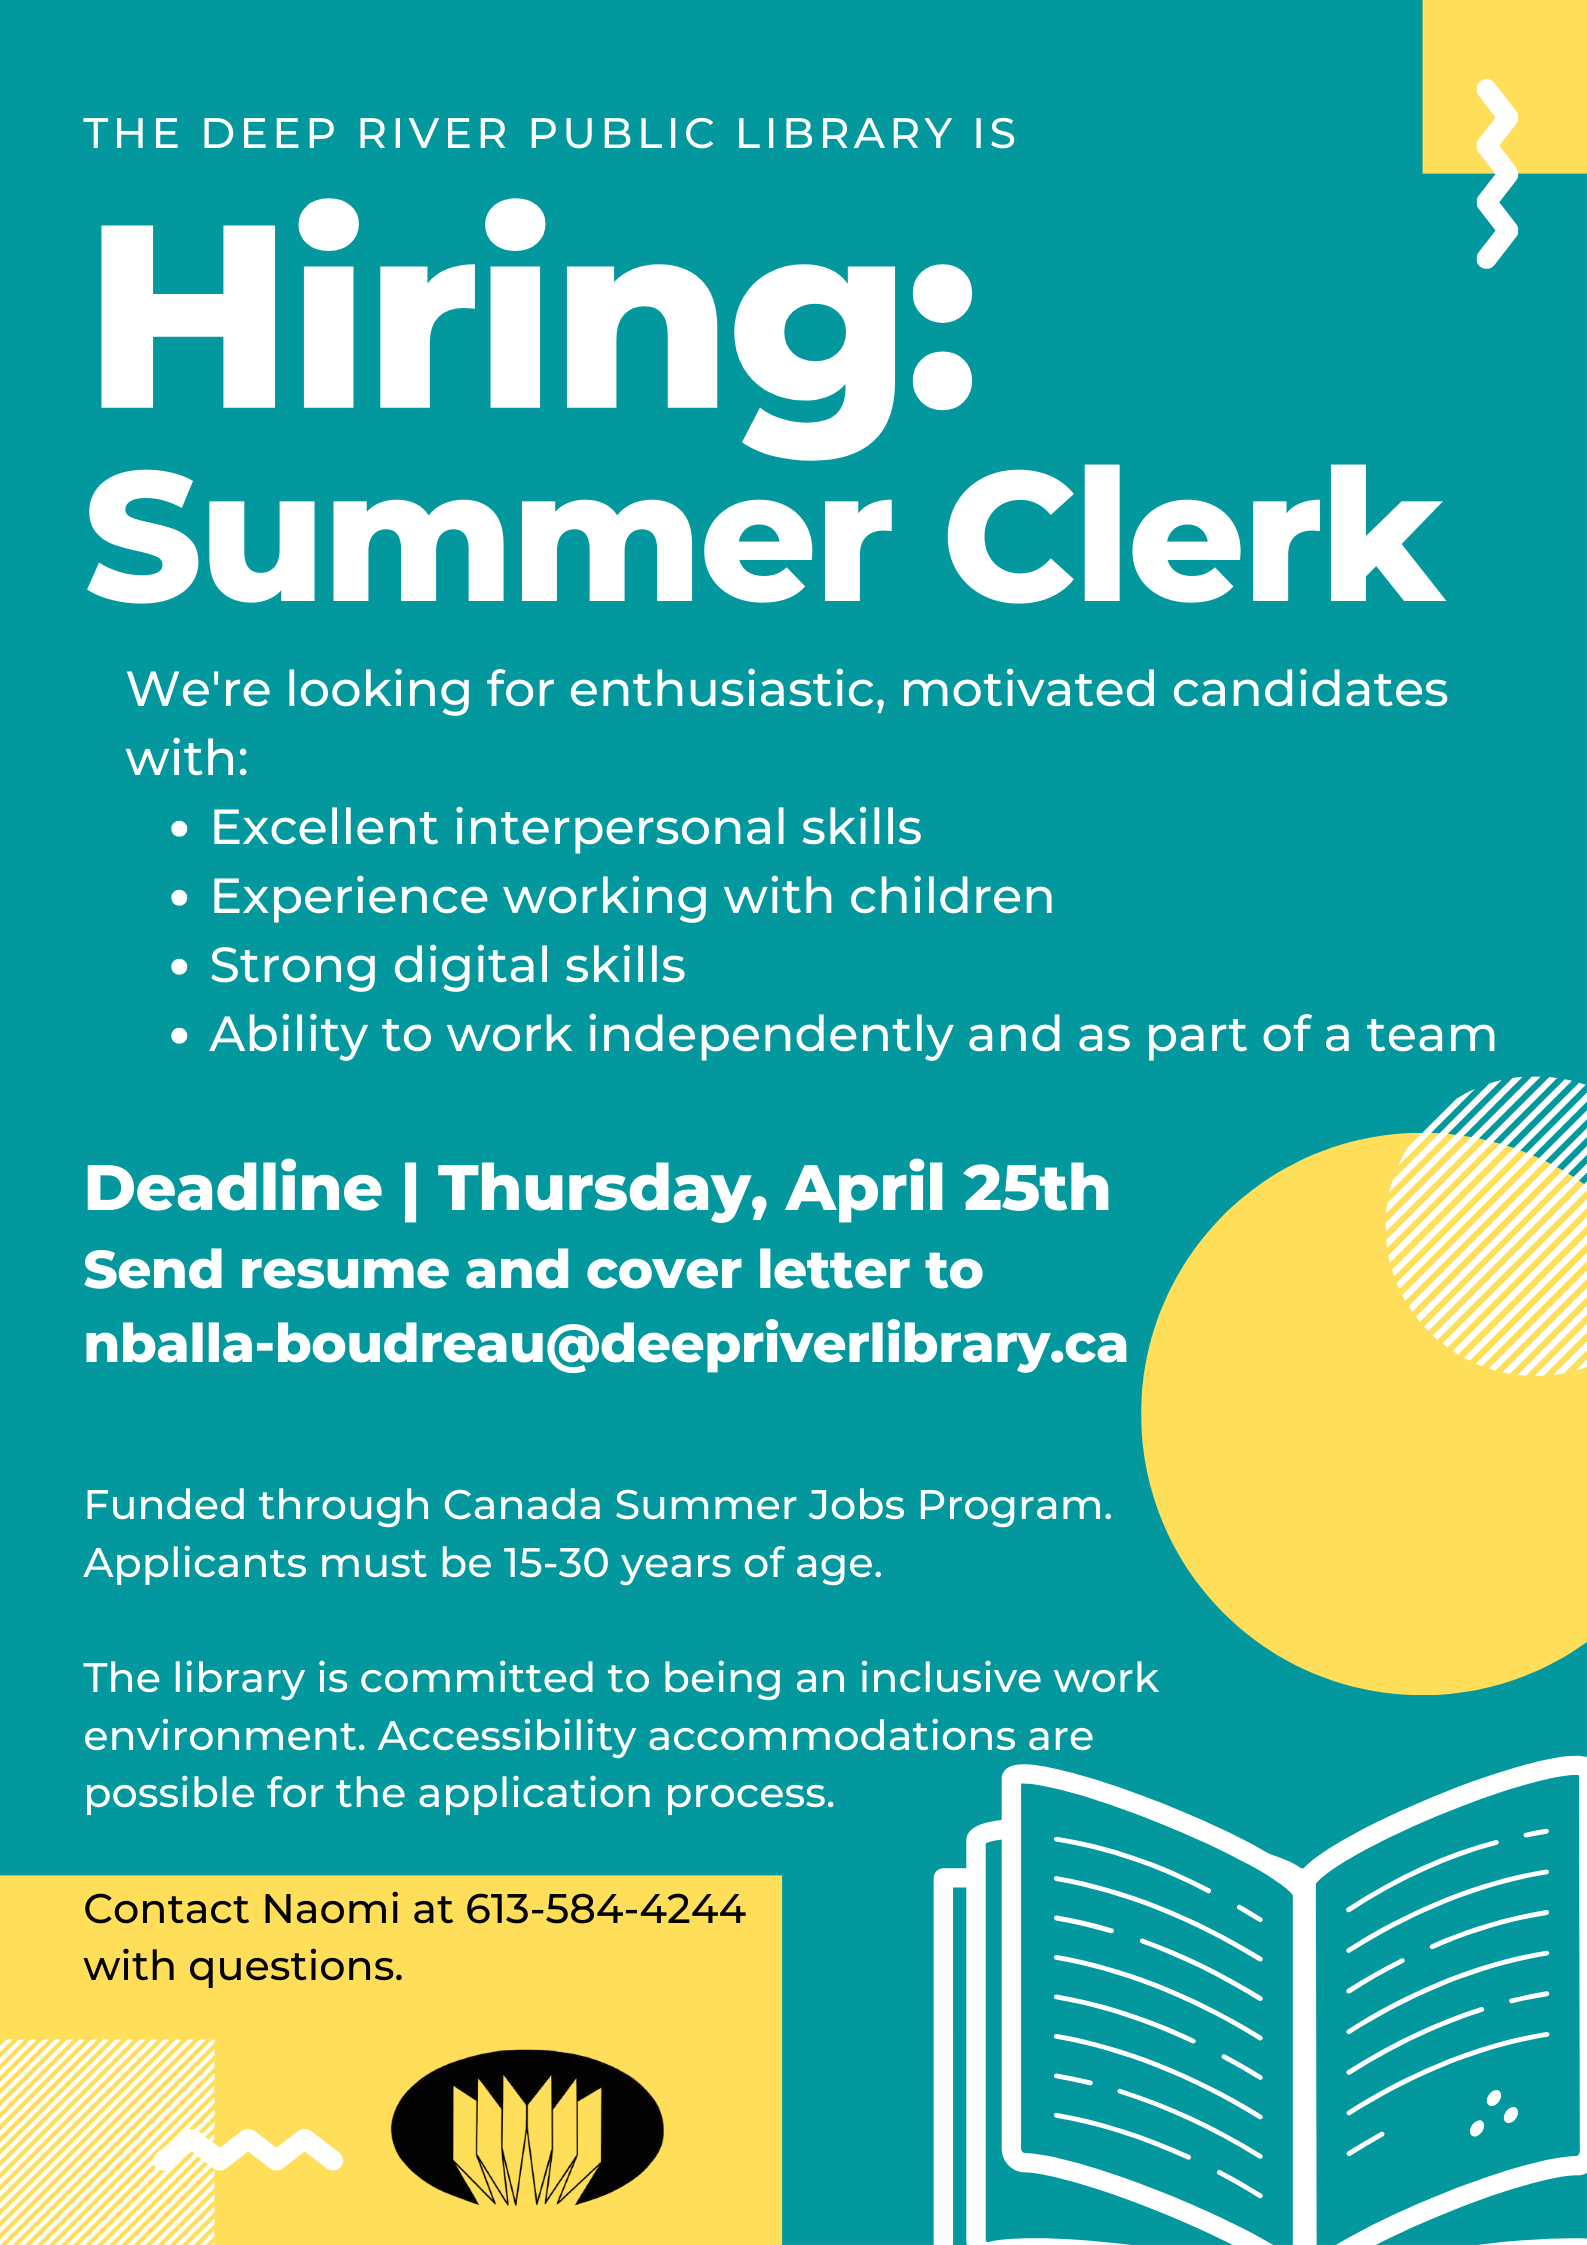 Job posting for summer clerk with turquoise backround, yellow accents, and an open book.